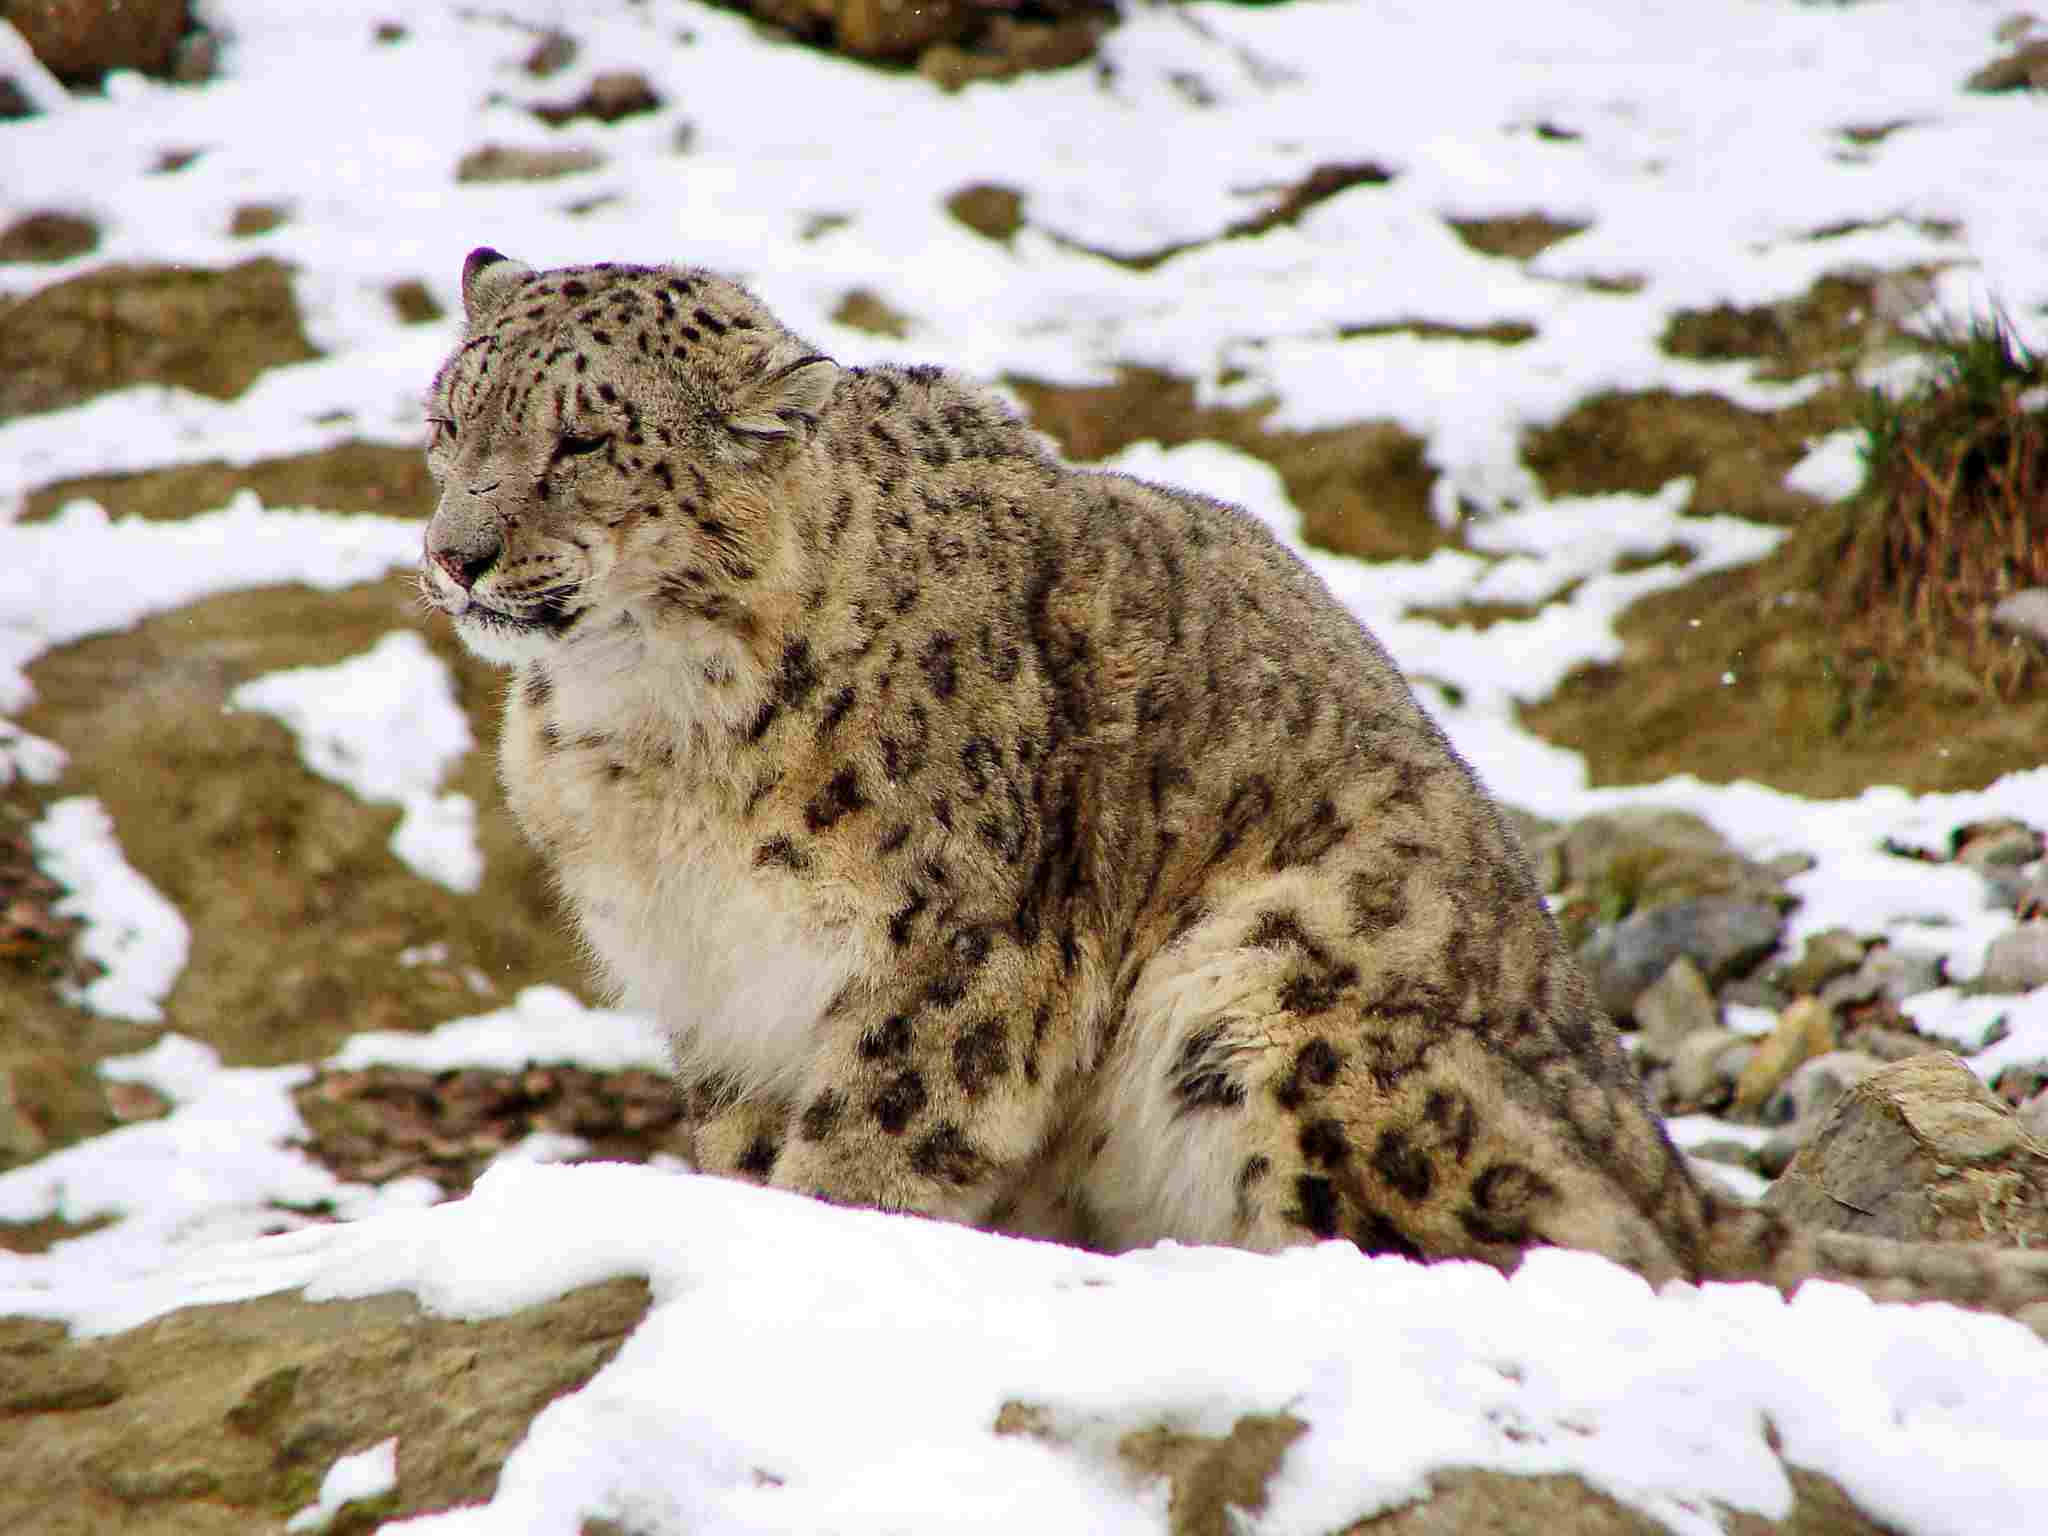 Snow Leopards' Predators and Prey Discussed: Camouflage and Elusive Behavior Contribute to the 'Ghostly' Reputation of the Snow Leopard (Credit: Tambako The Jaguar 2005, Uploaded Online 2007 .CC BY-ND 2.0.)